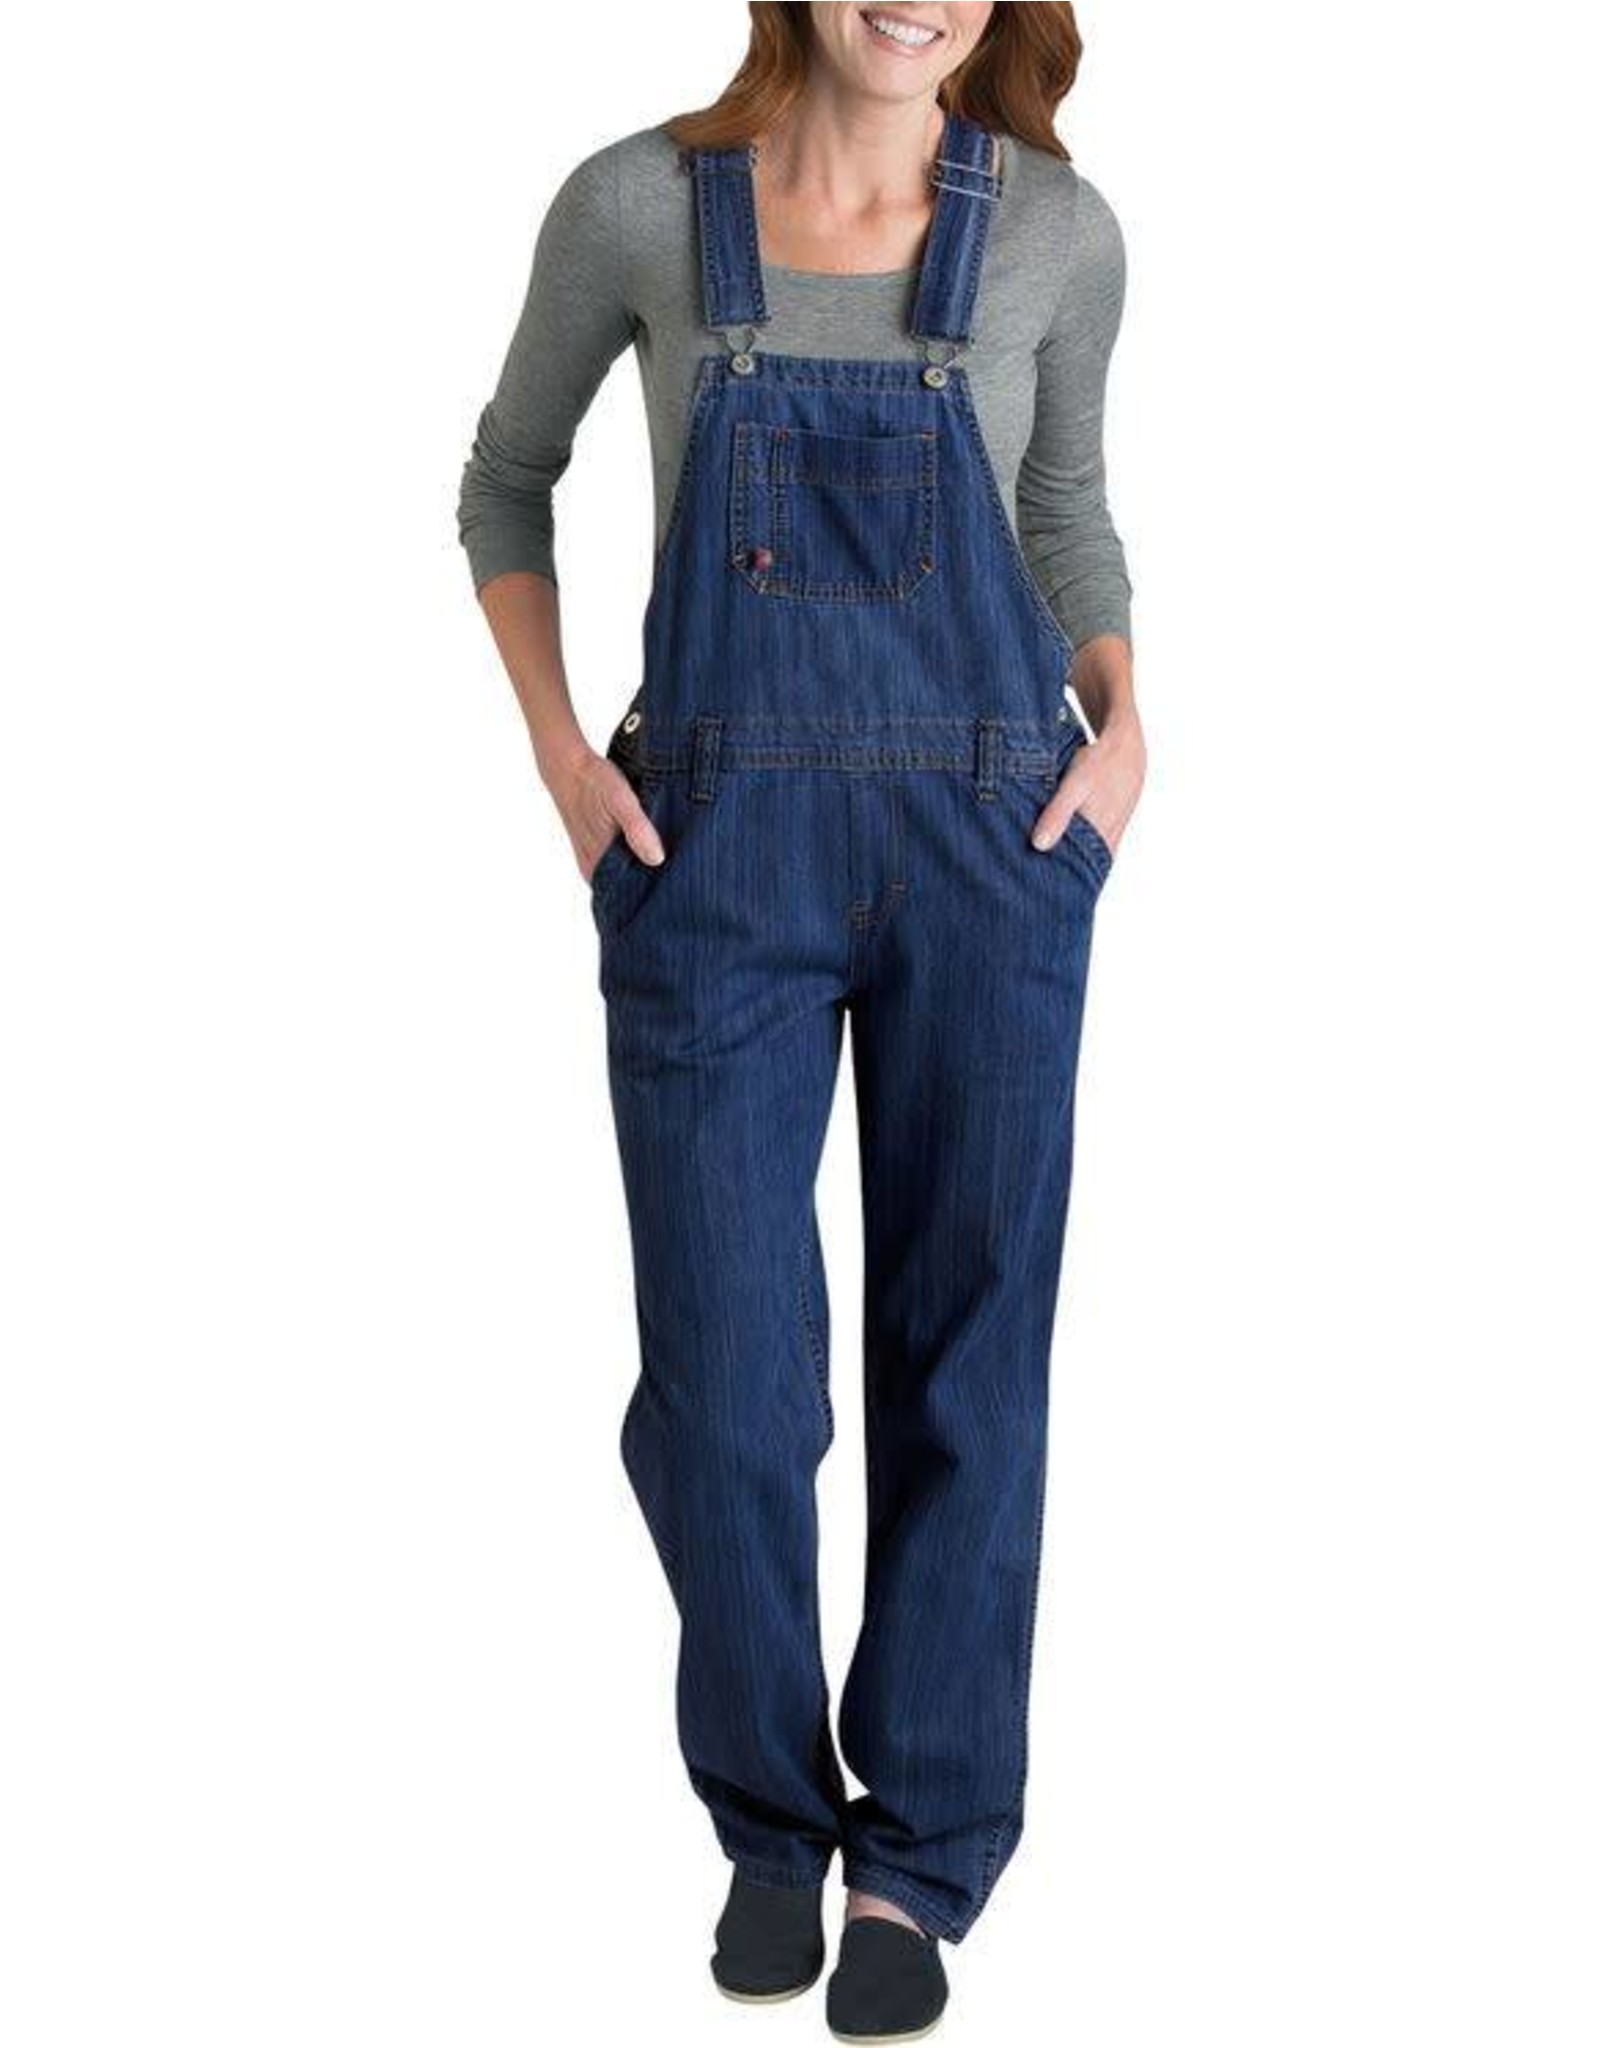 Women's Relaxed Fit Bib Overalls FB206